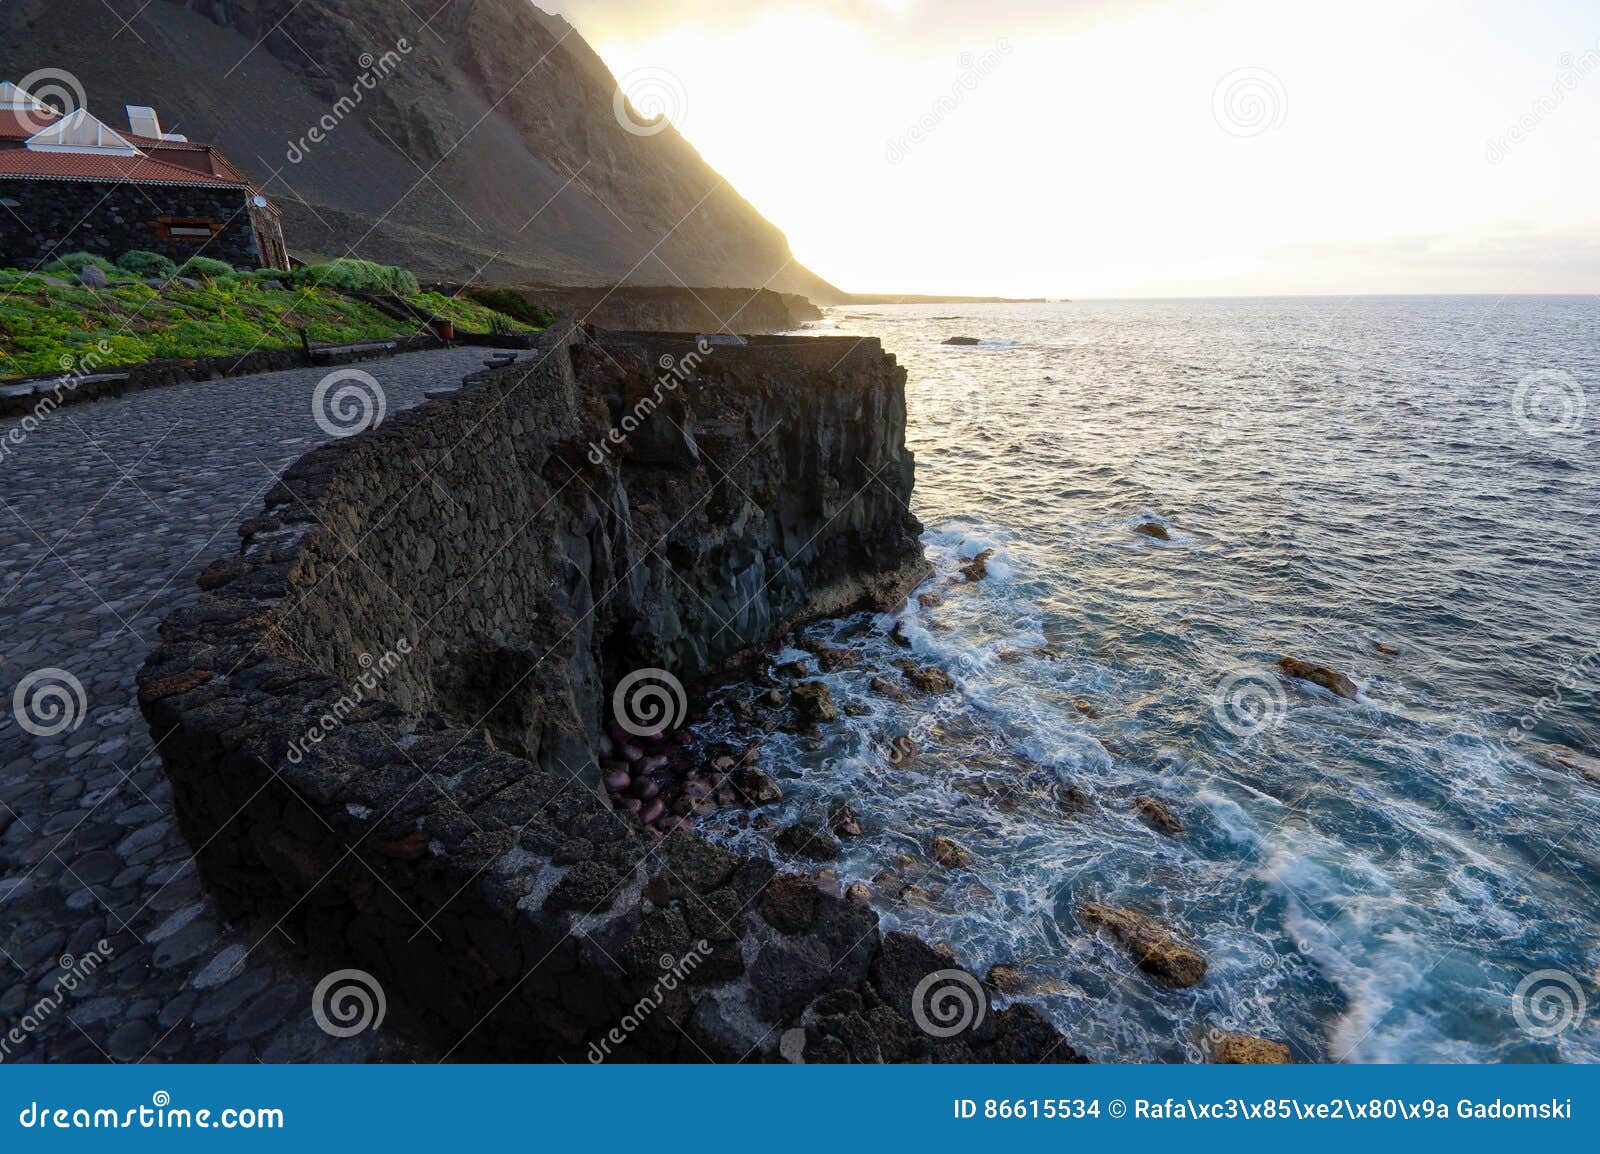 the sunset on el hierro, canary, spain